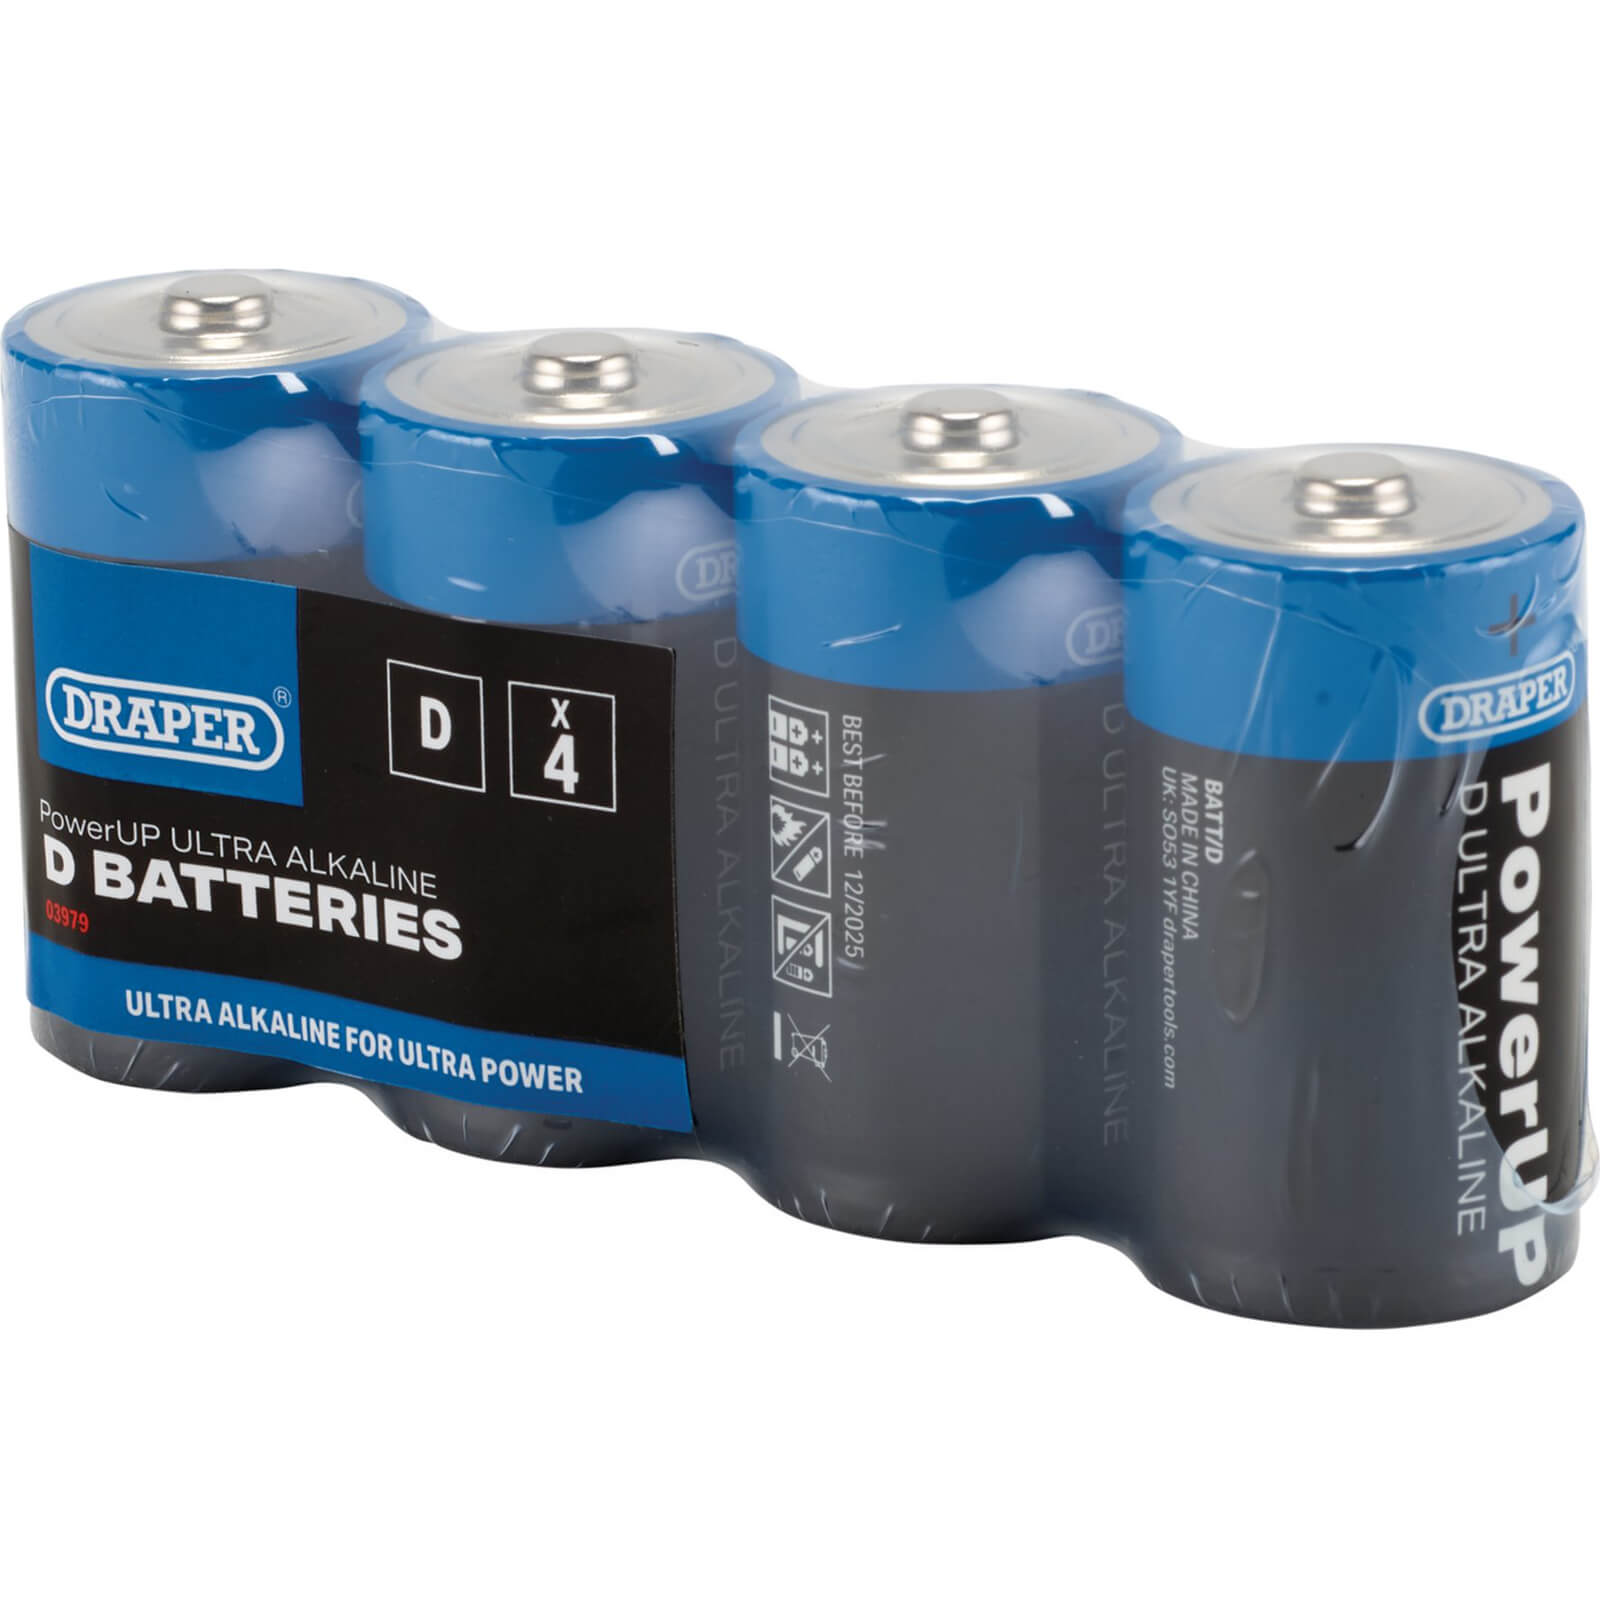 Image of Draper Powerup Ultra Alkaline D Cell Batteries Pack of 4